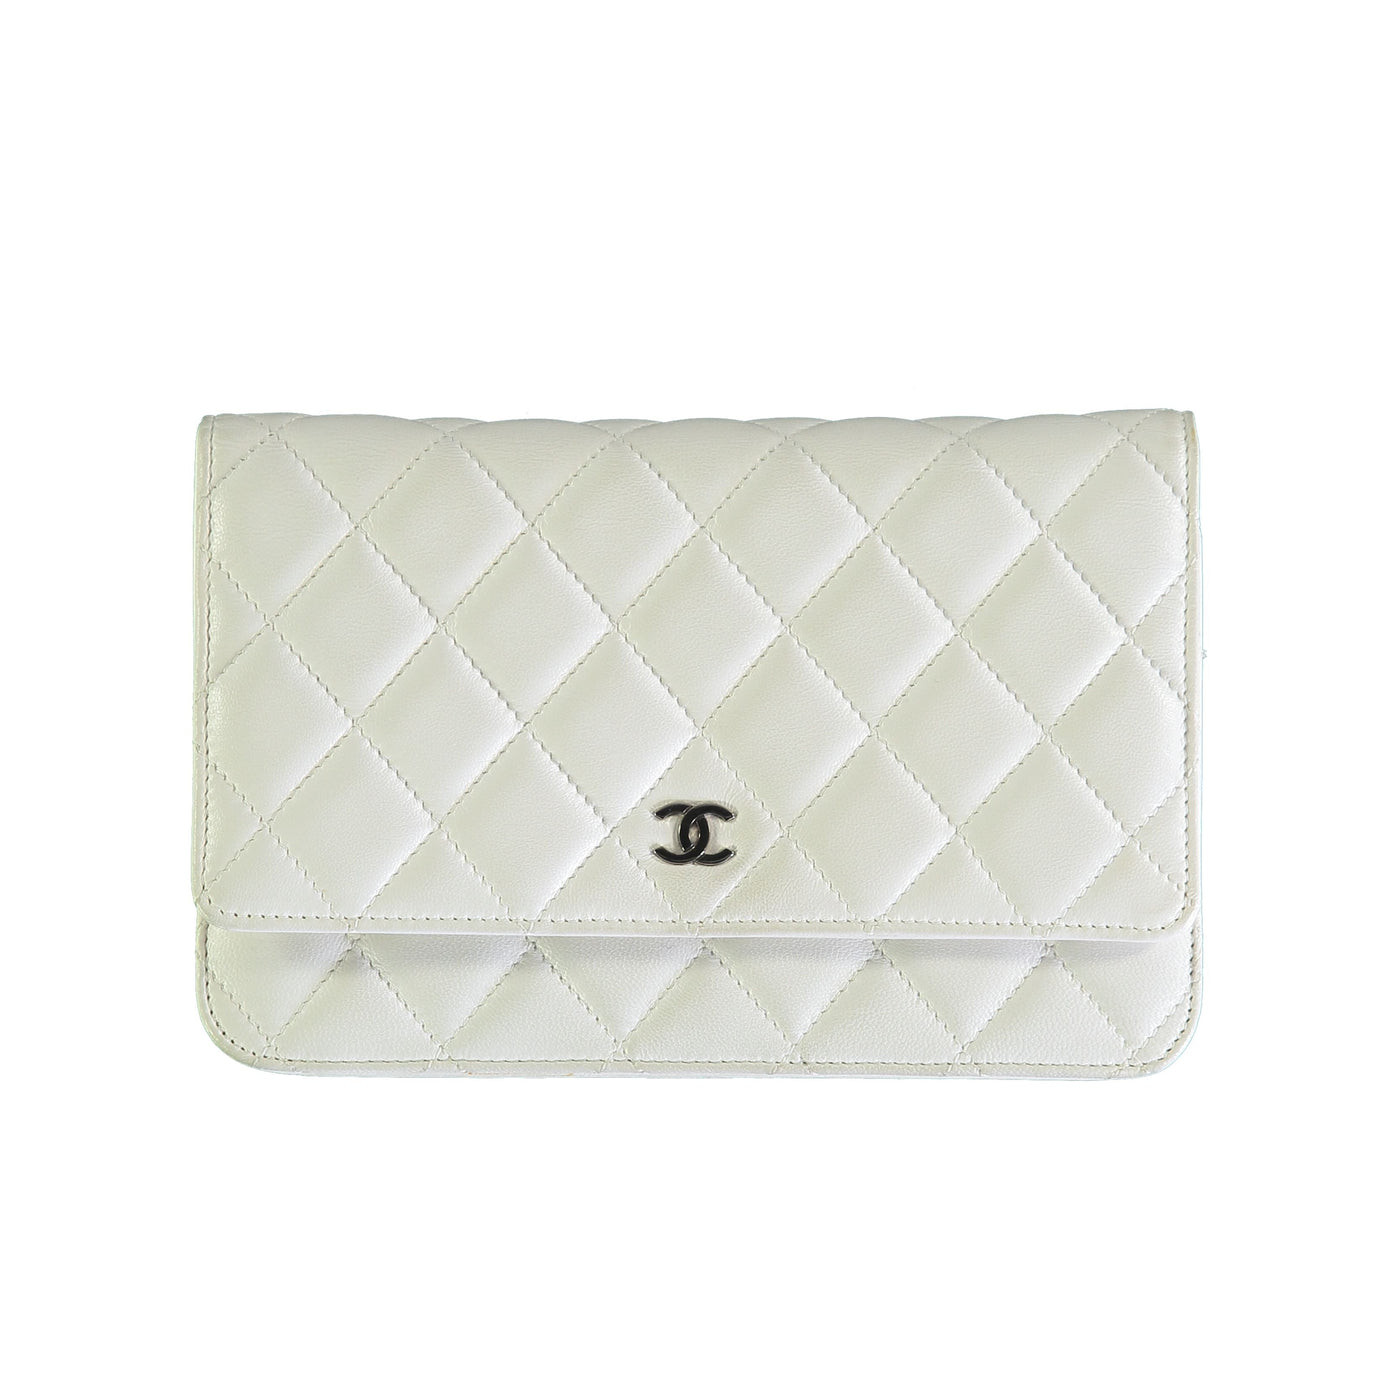 Secondhand Chanel Timeless Classic Wallet on Chain